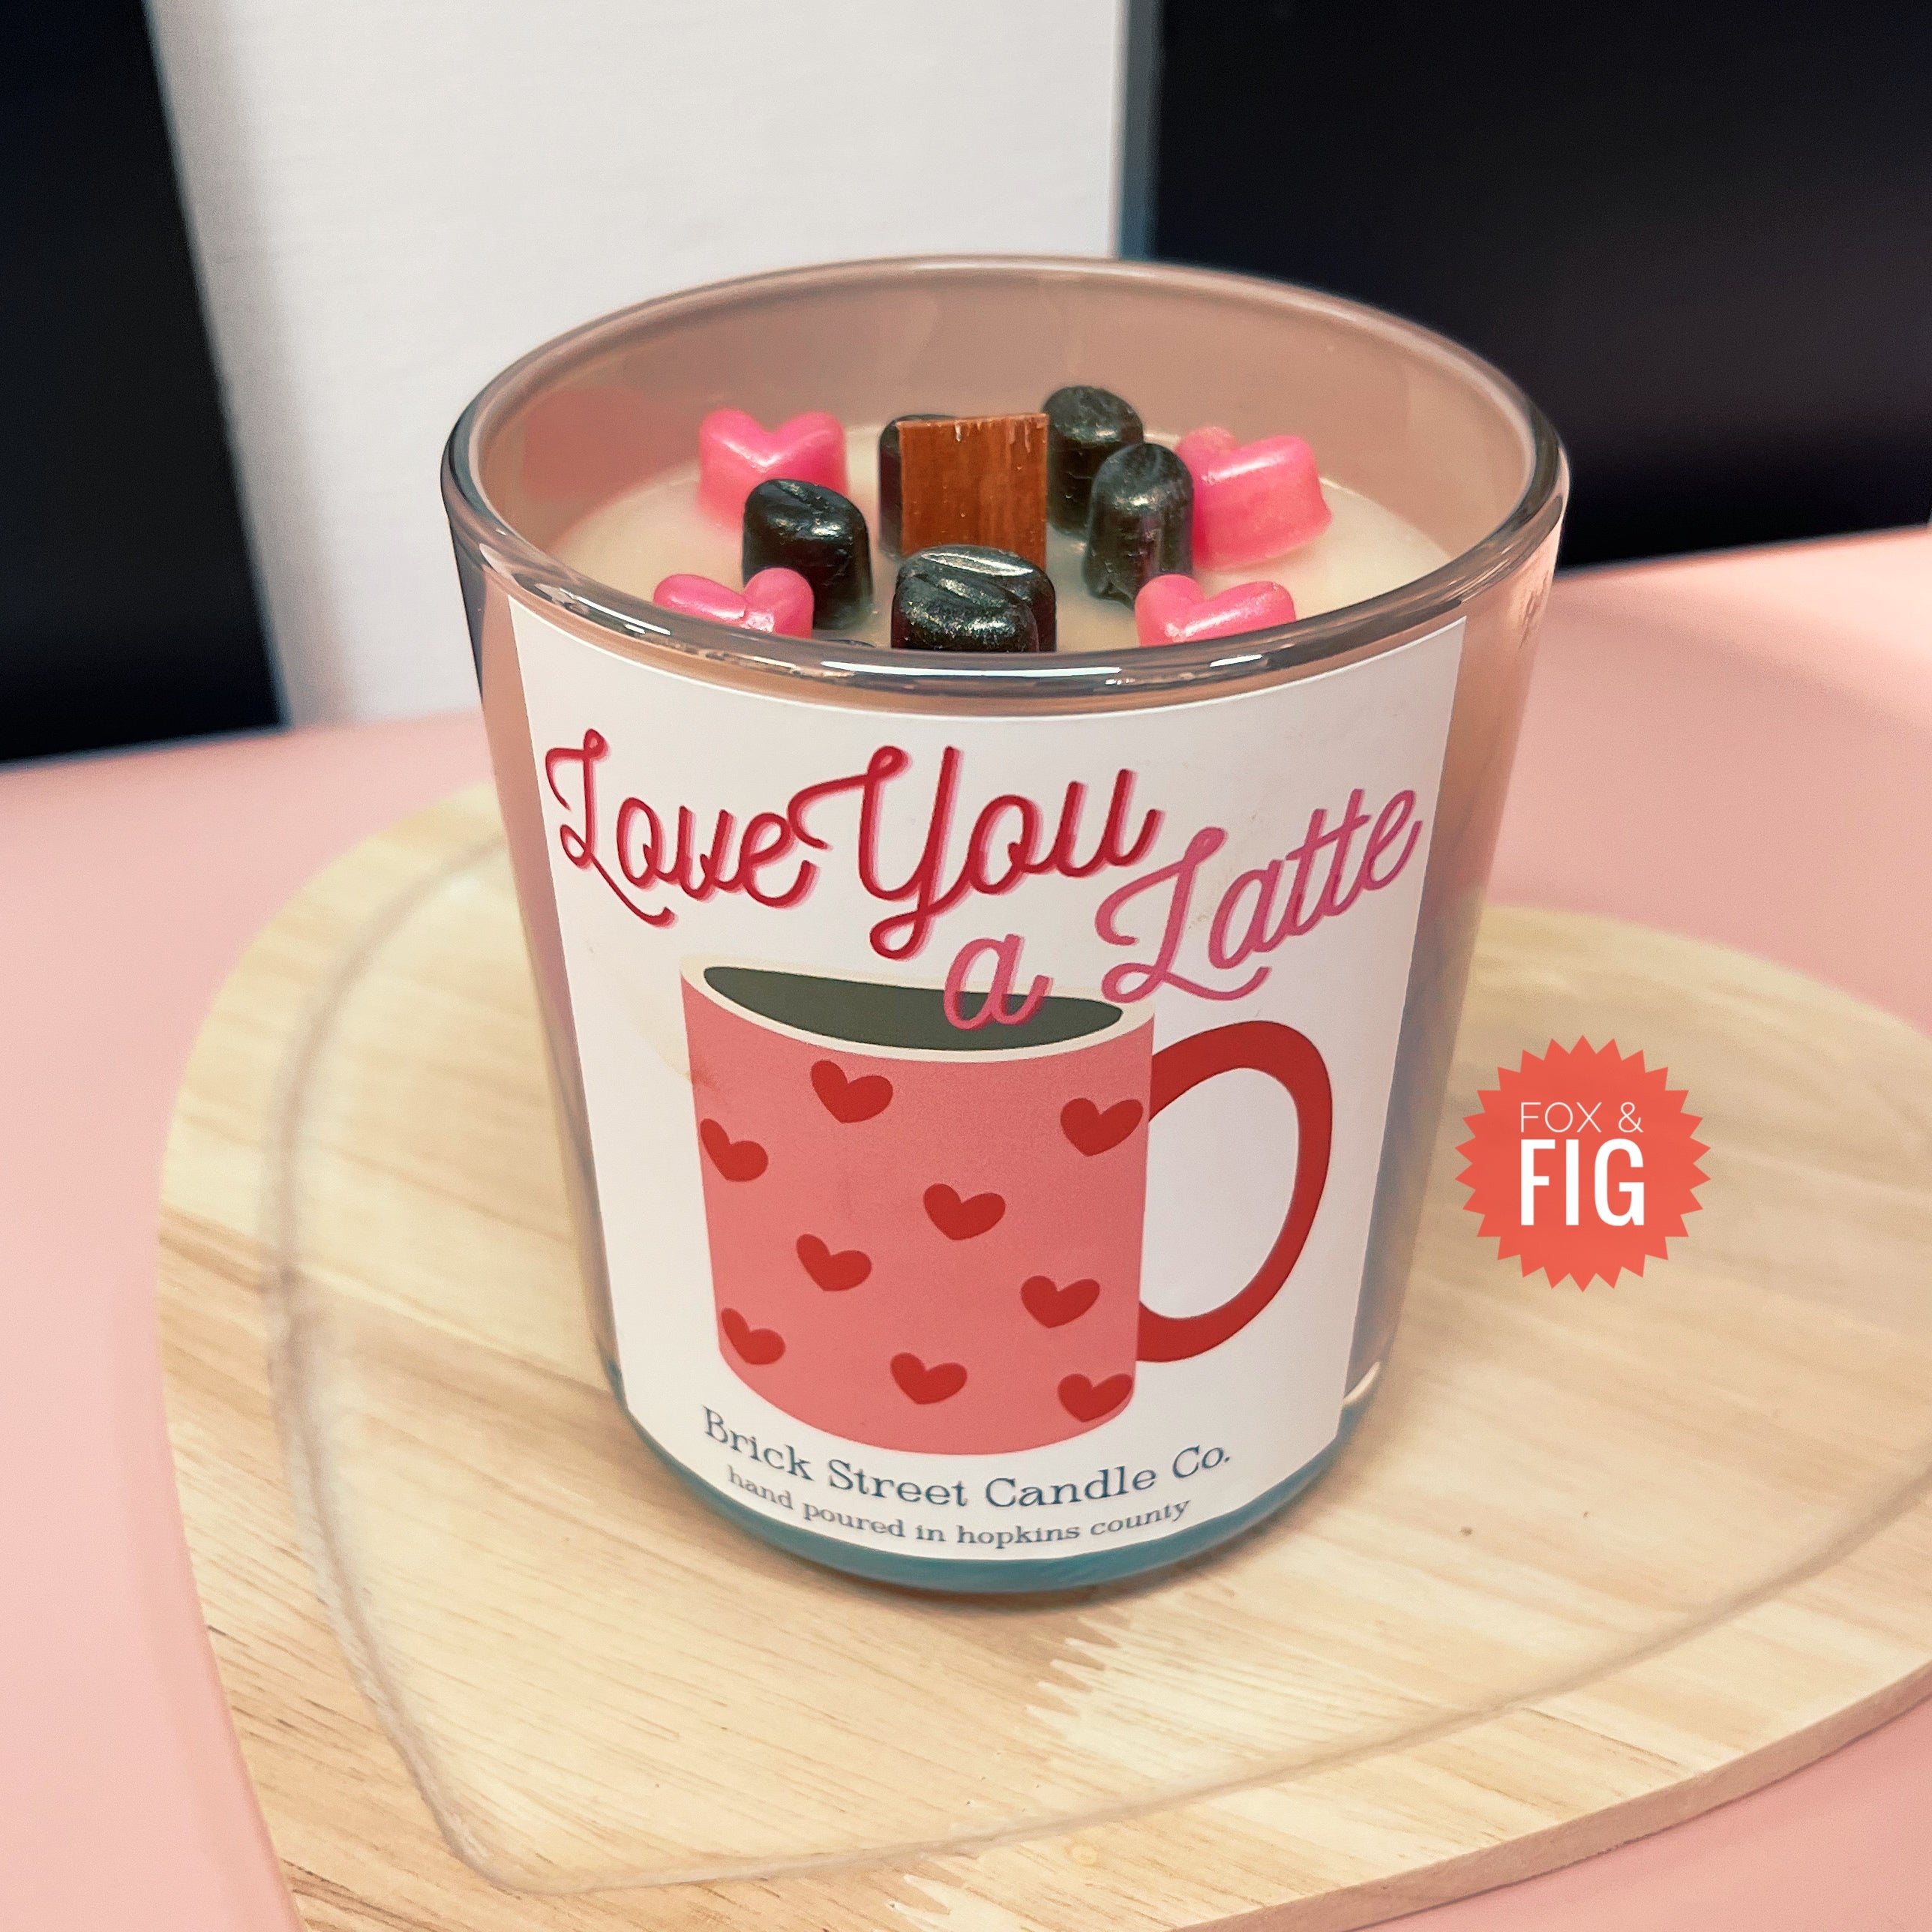 Brick Street Candle Co. ~ Love You a Latte